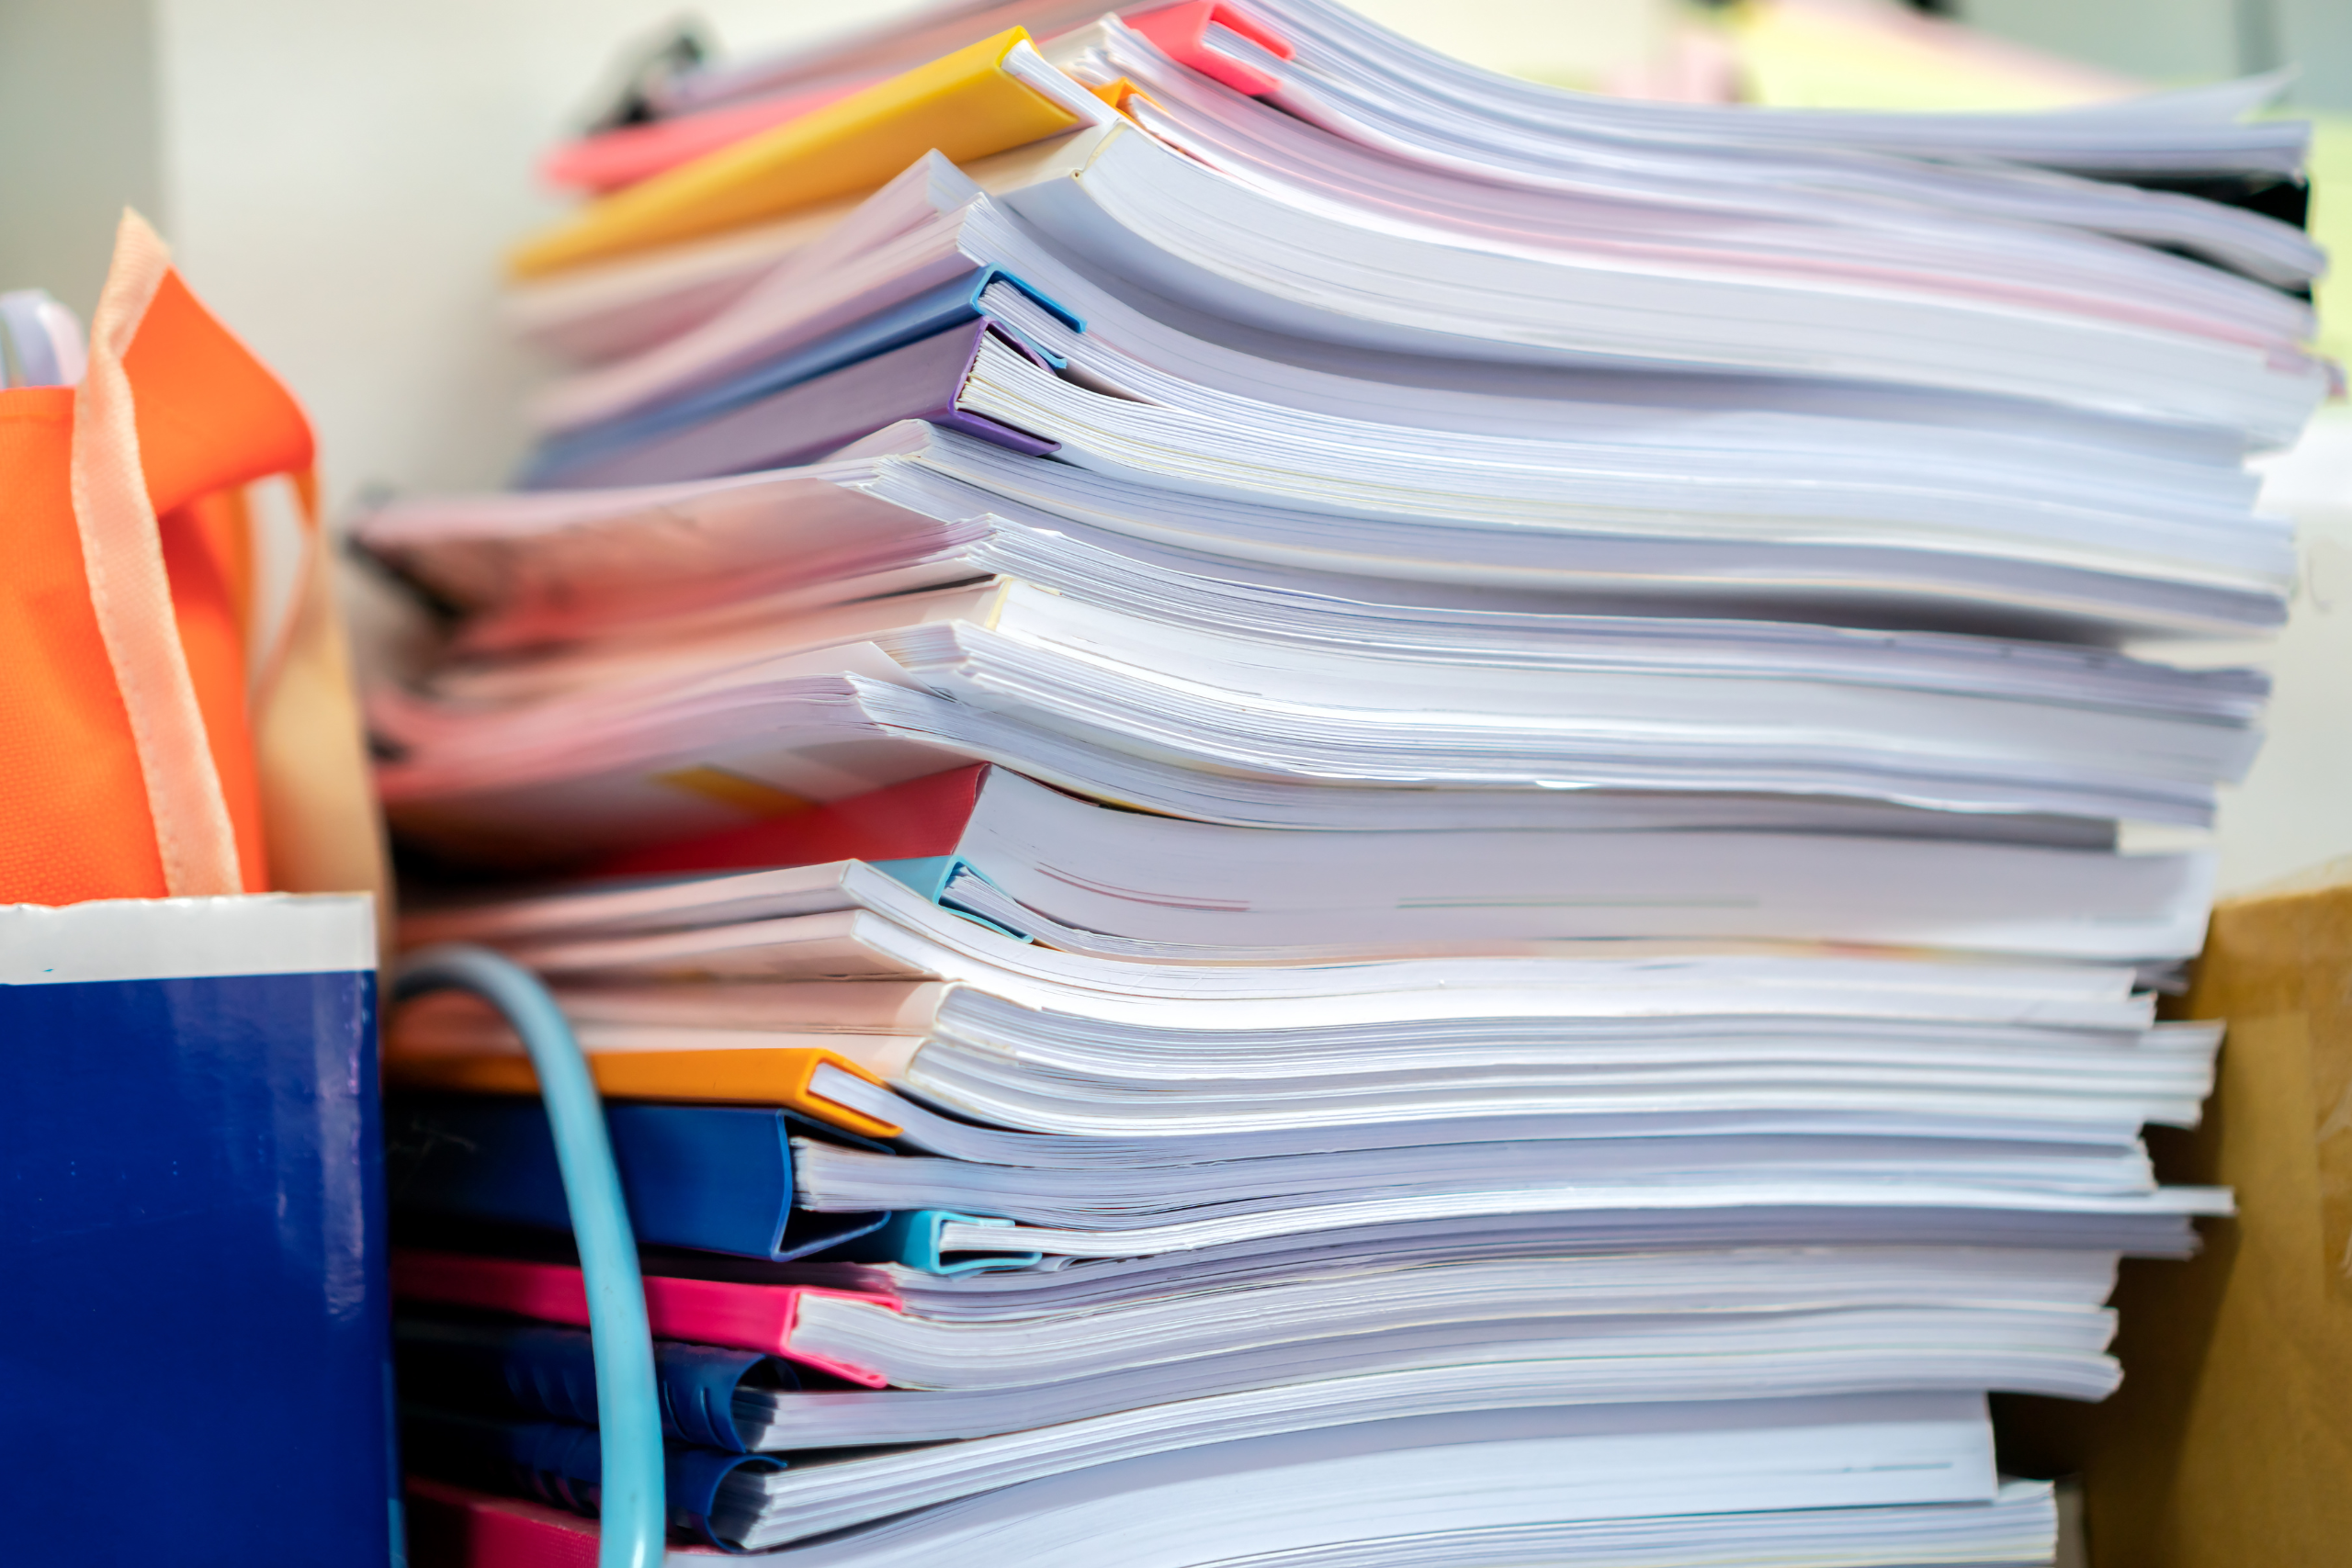 Stacks of assorted paperwork and files, indicating a busy office or administrative work.